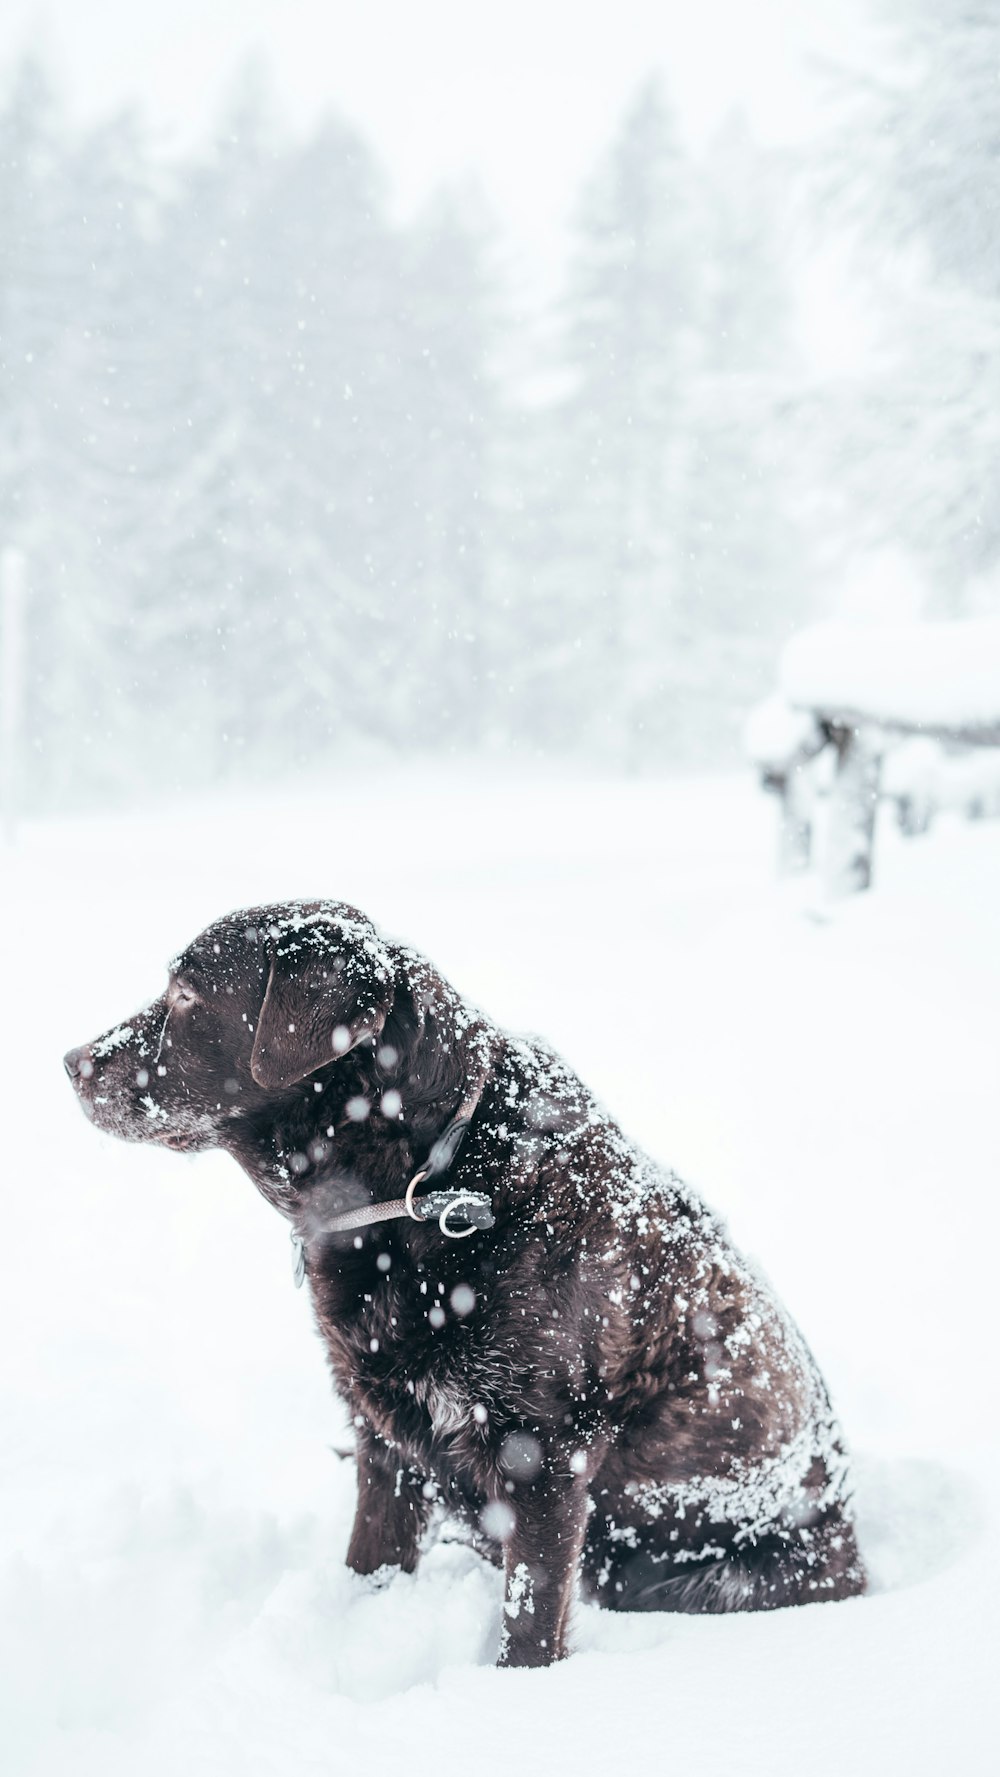 adult chocolate Labrador retriever sitting outside with snow